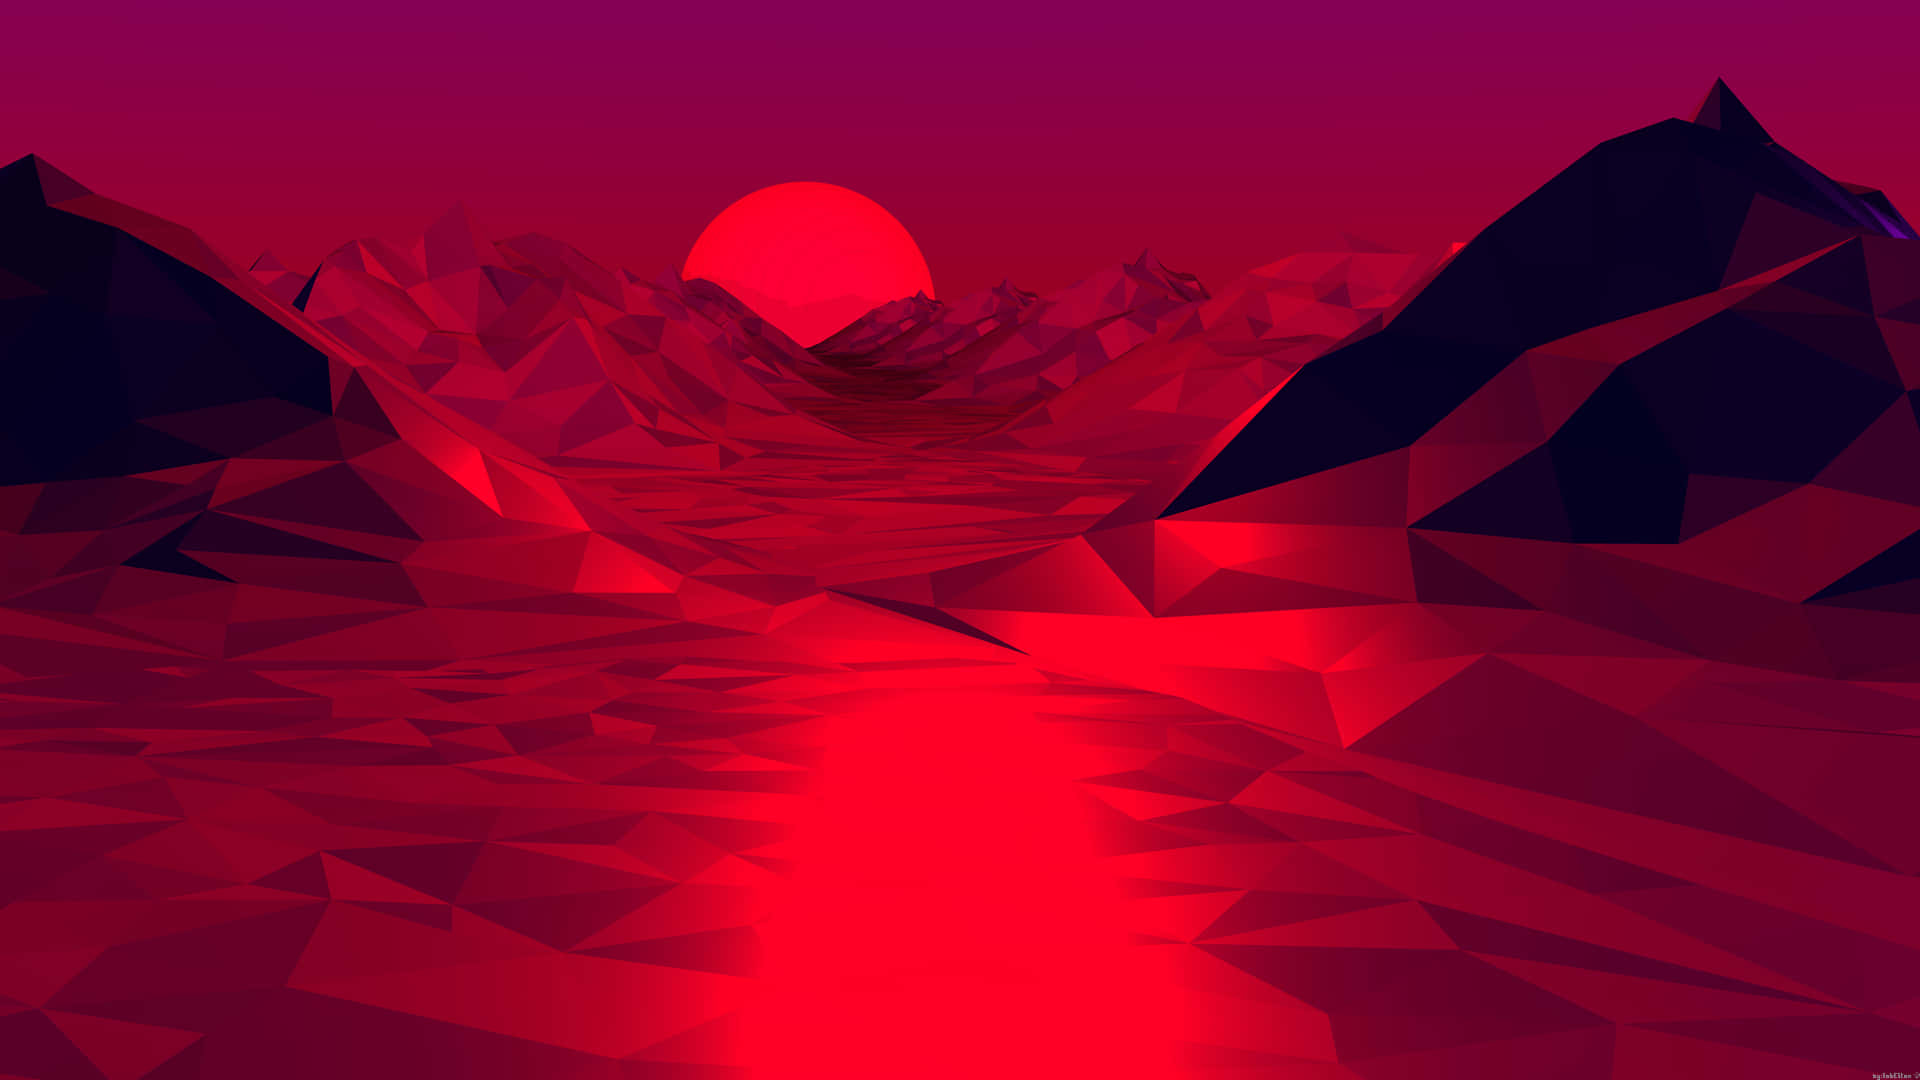 Mountains Polygon Art Aesthetic Red Background